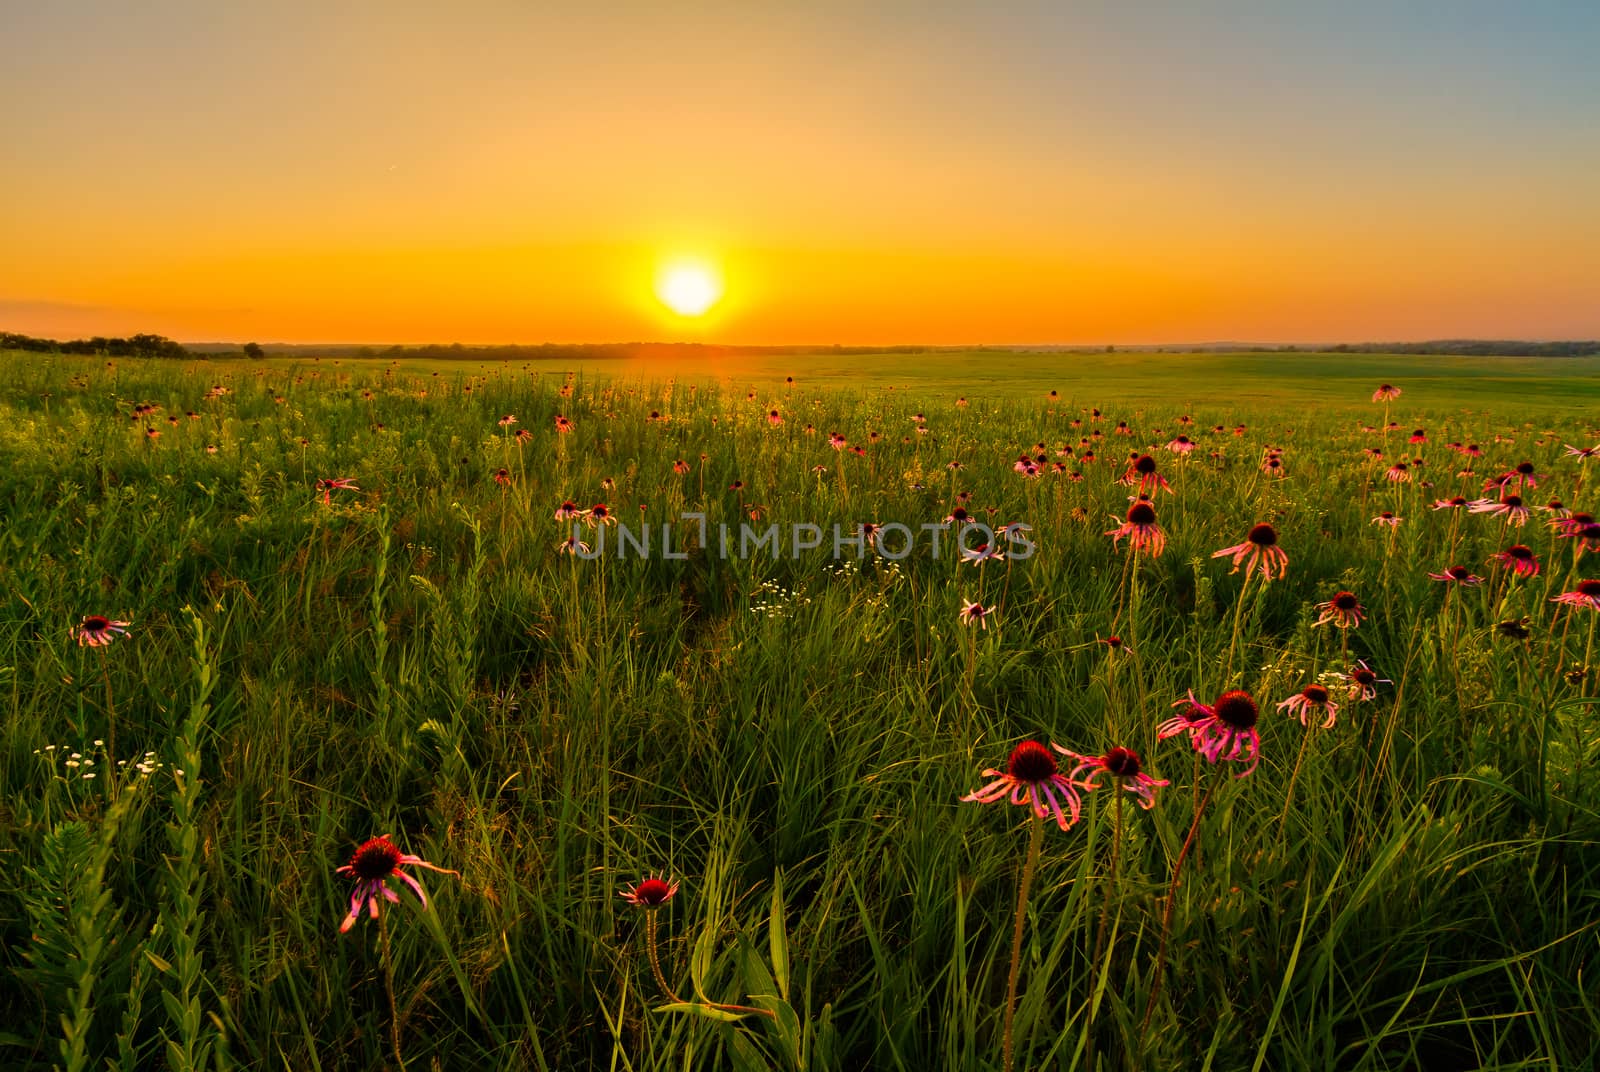 Sunset in a Prairie Field of Purple Coneflowers by TommyBrison